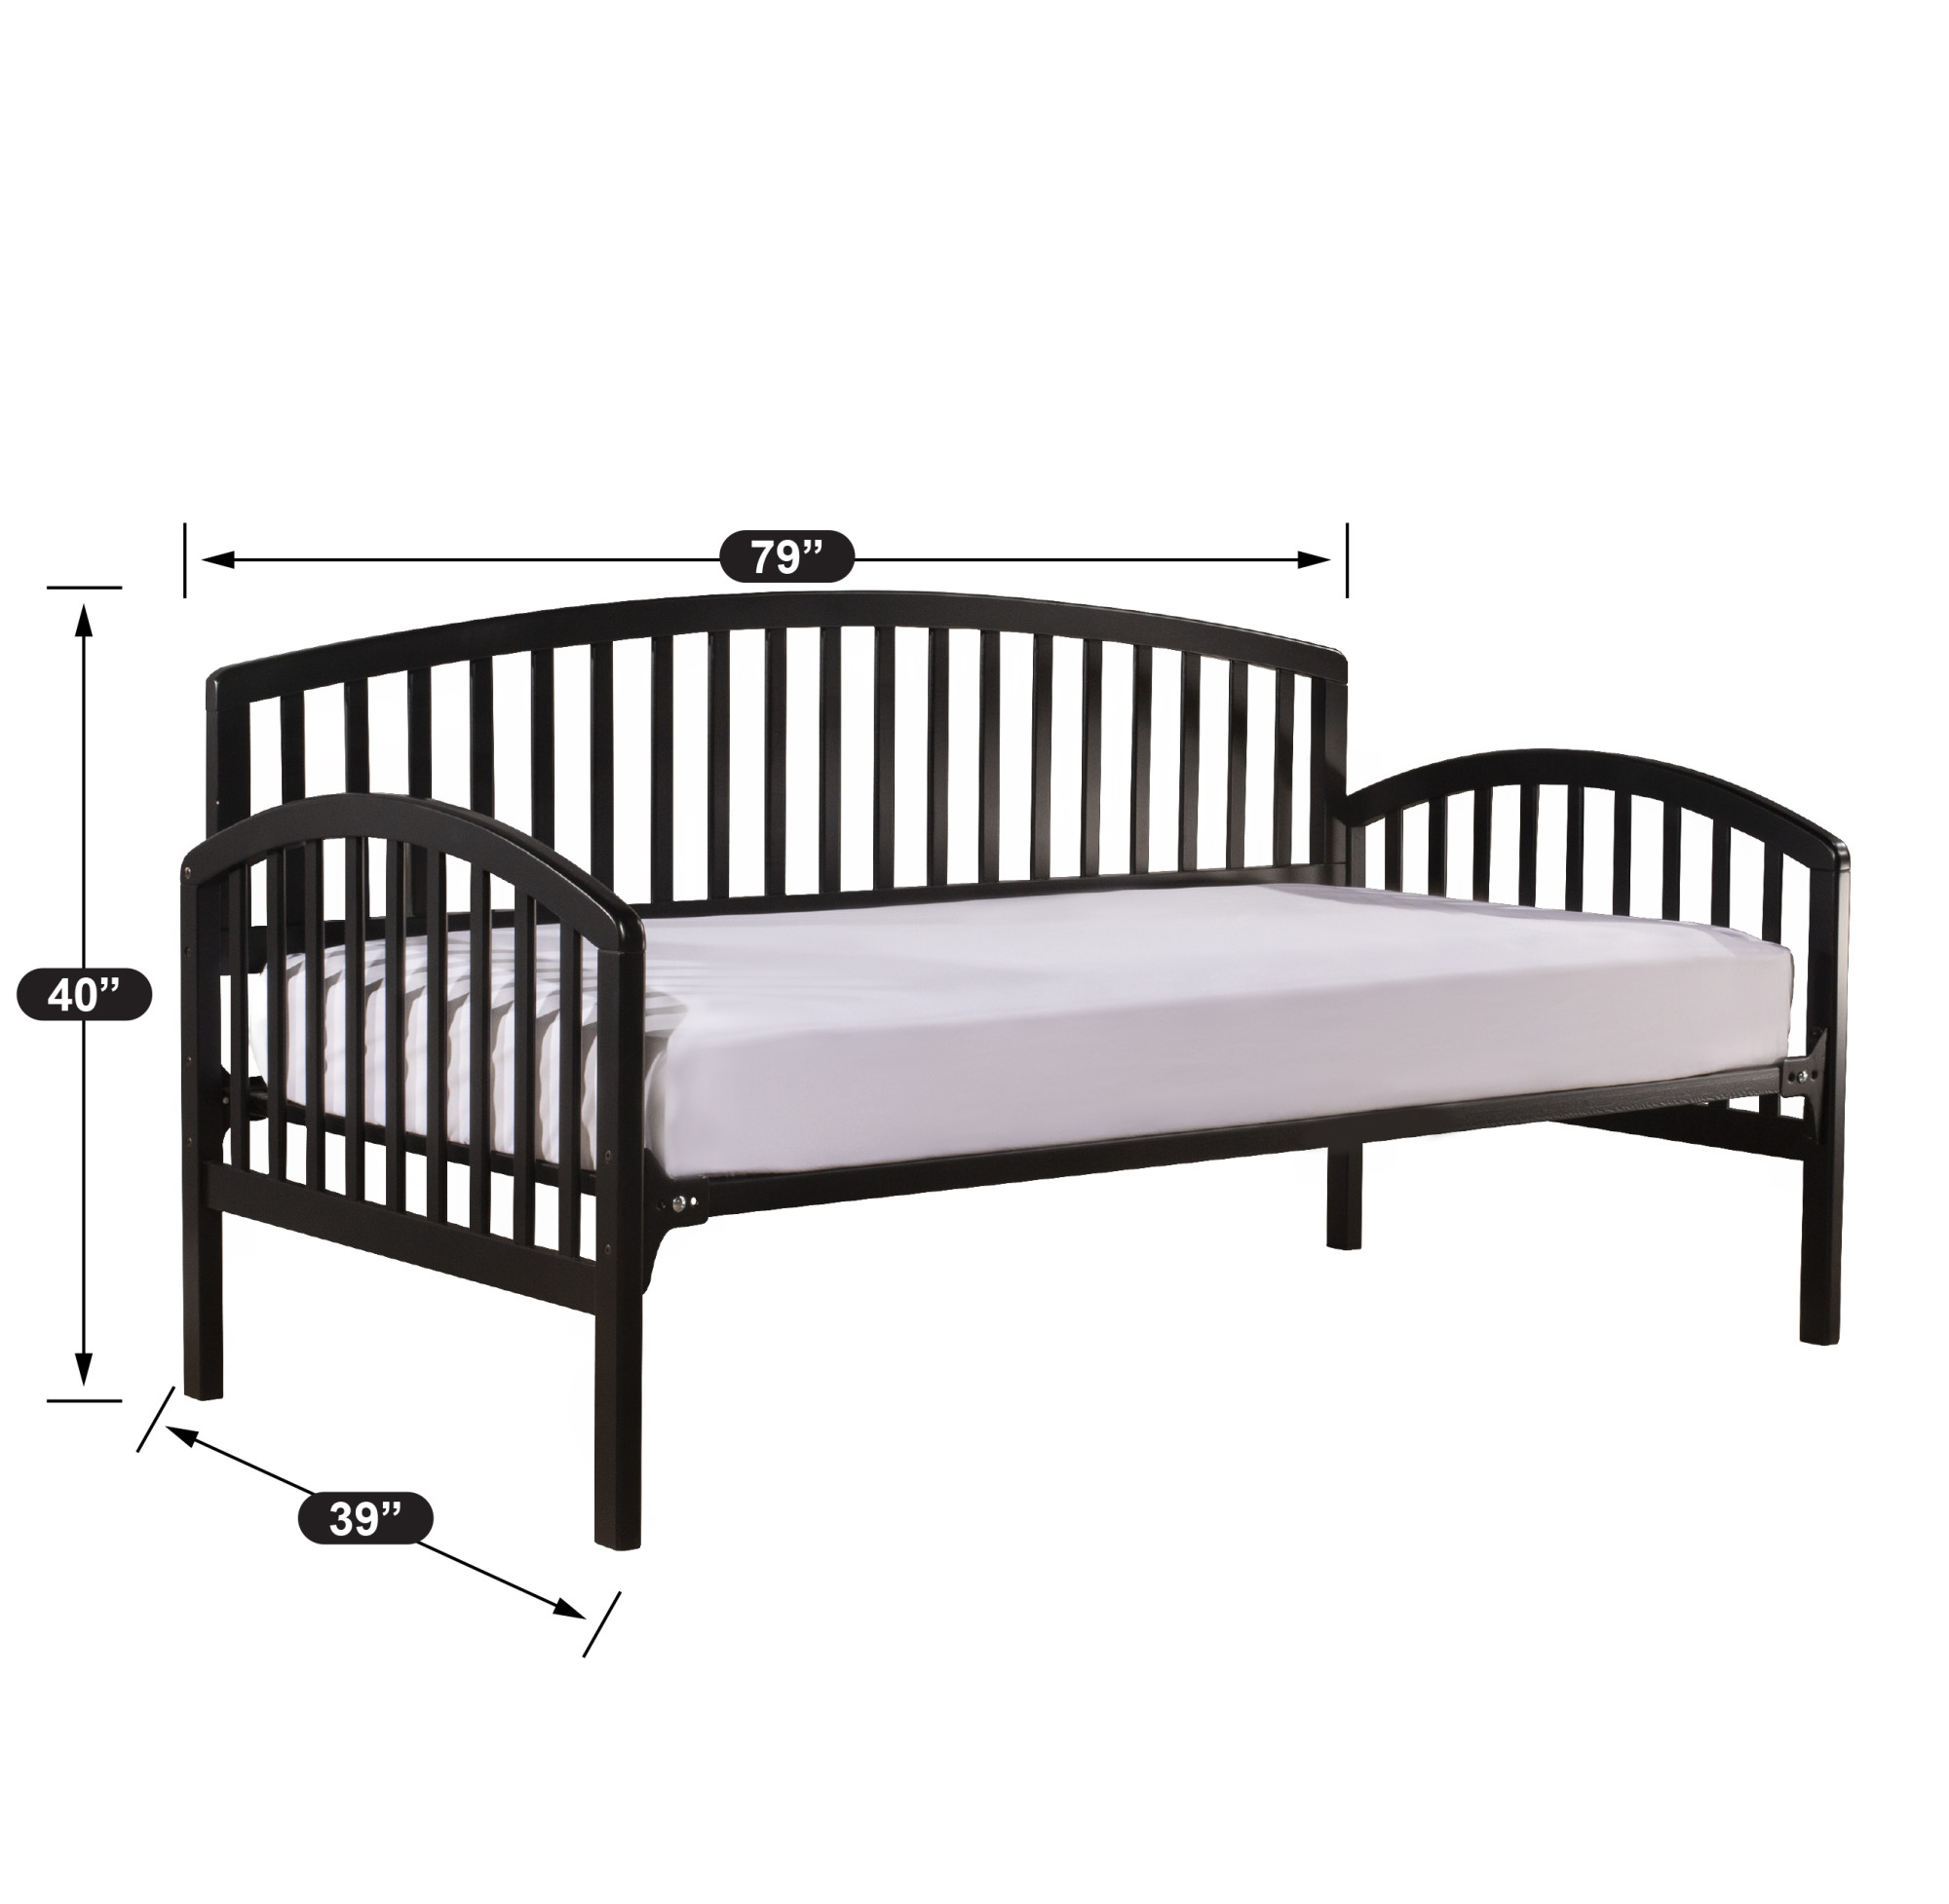 Hillsdale Furniture Carolina Wood Twin Daybed, Rubbed Black - image 3 of 11